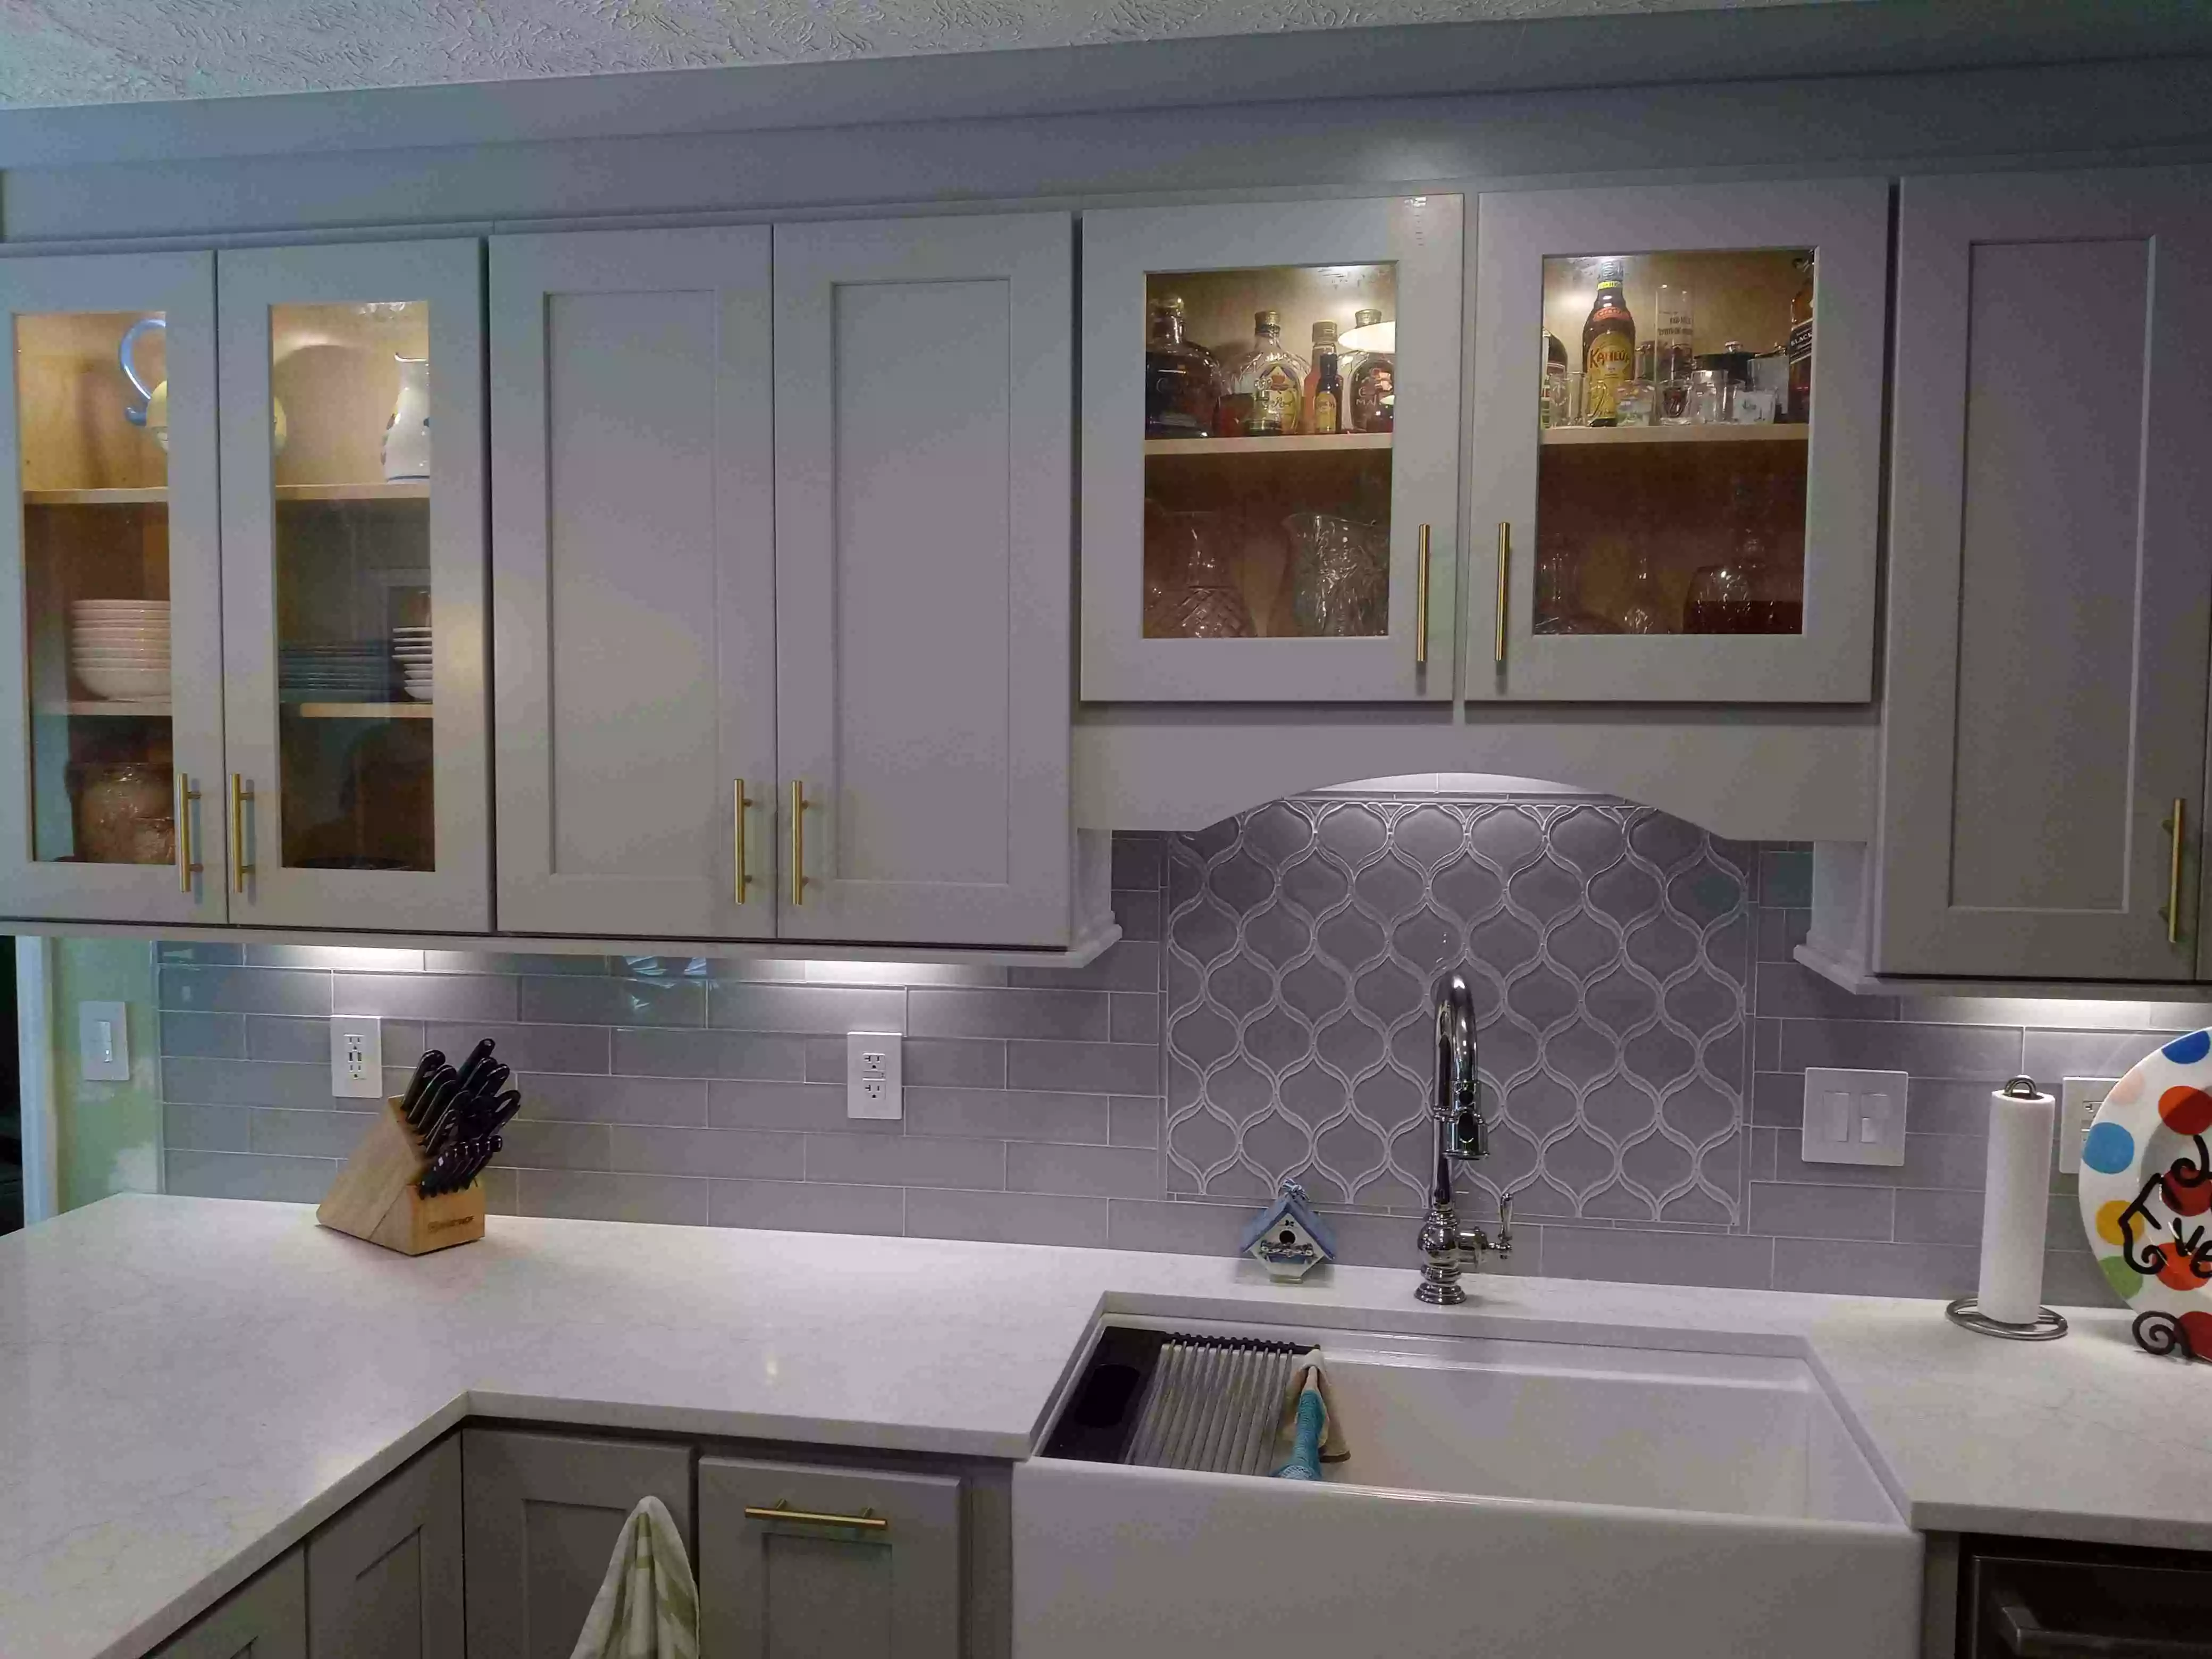 Kitchen cabinet project with beautiful white sink and white countertop.